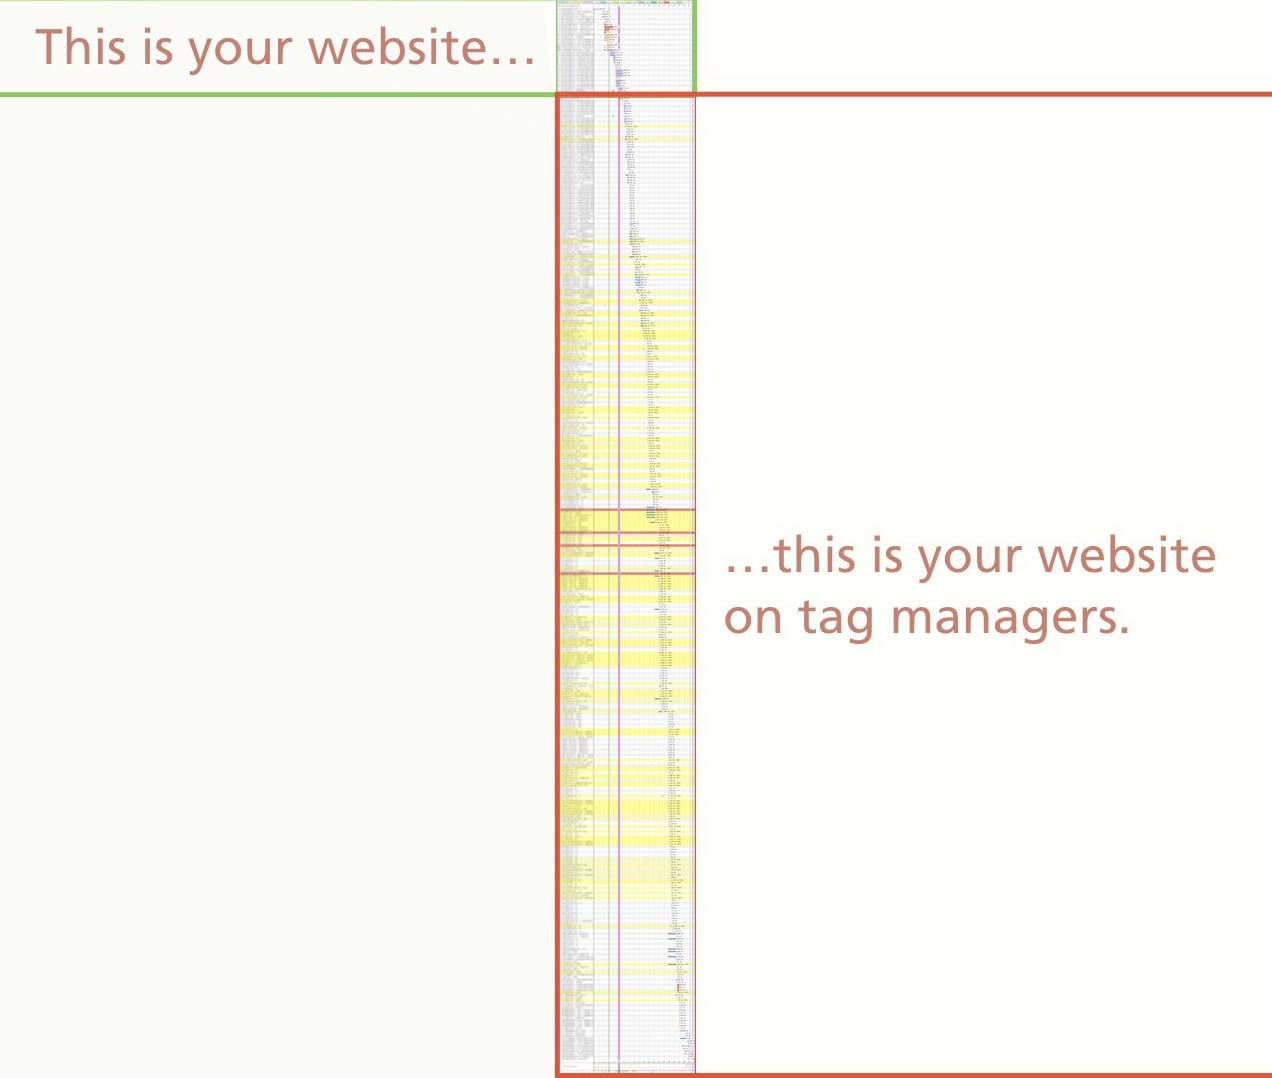 Your website on tag managers